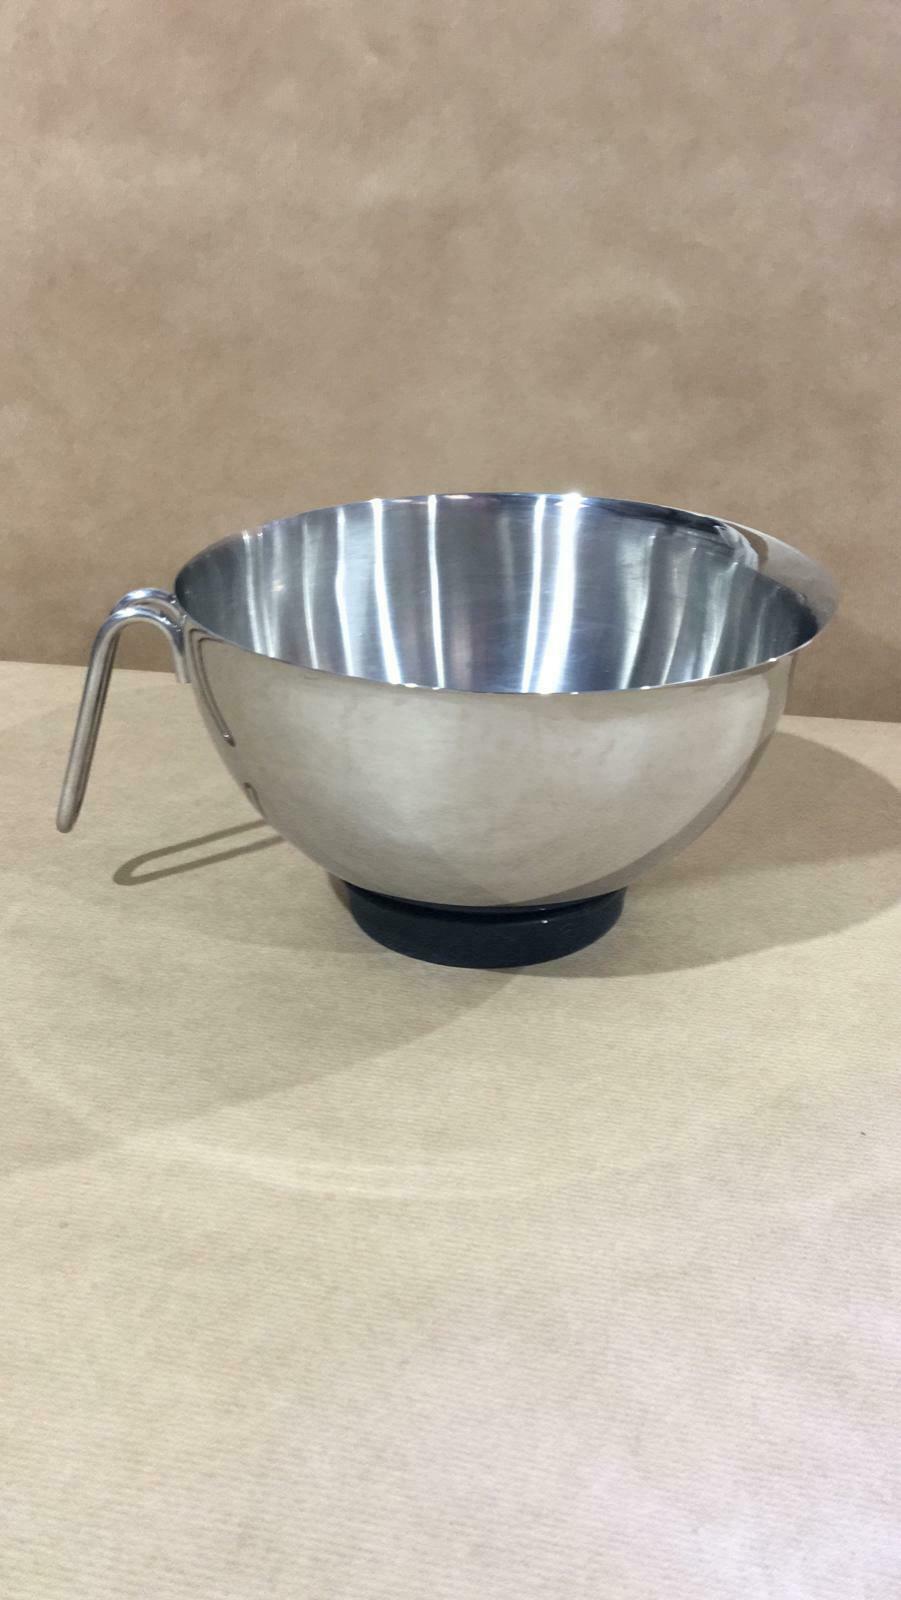 WMF 645656030 Mixing Bowl + stable stand in stainless steel Ø20cm x12cm:H 2020